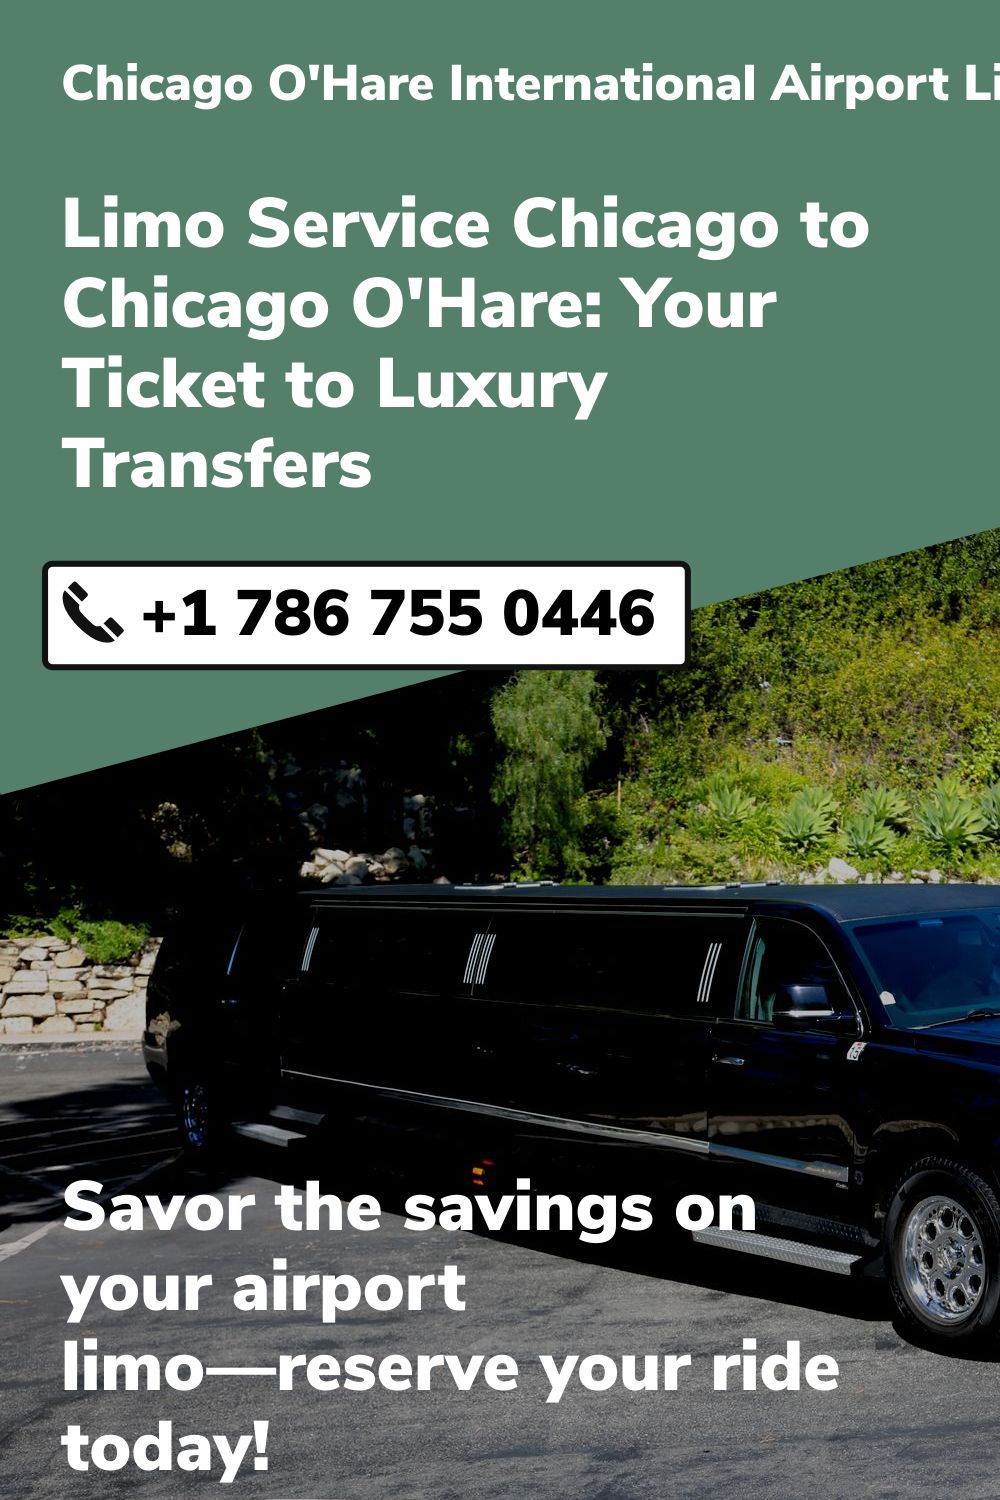 Chicago O'Hare International Airport Limo